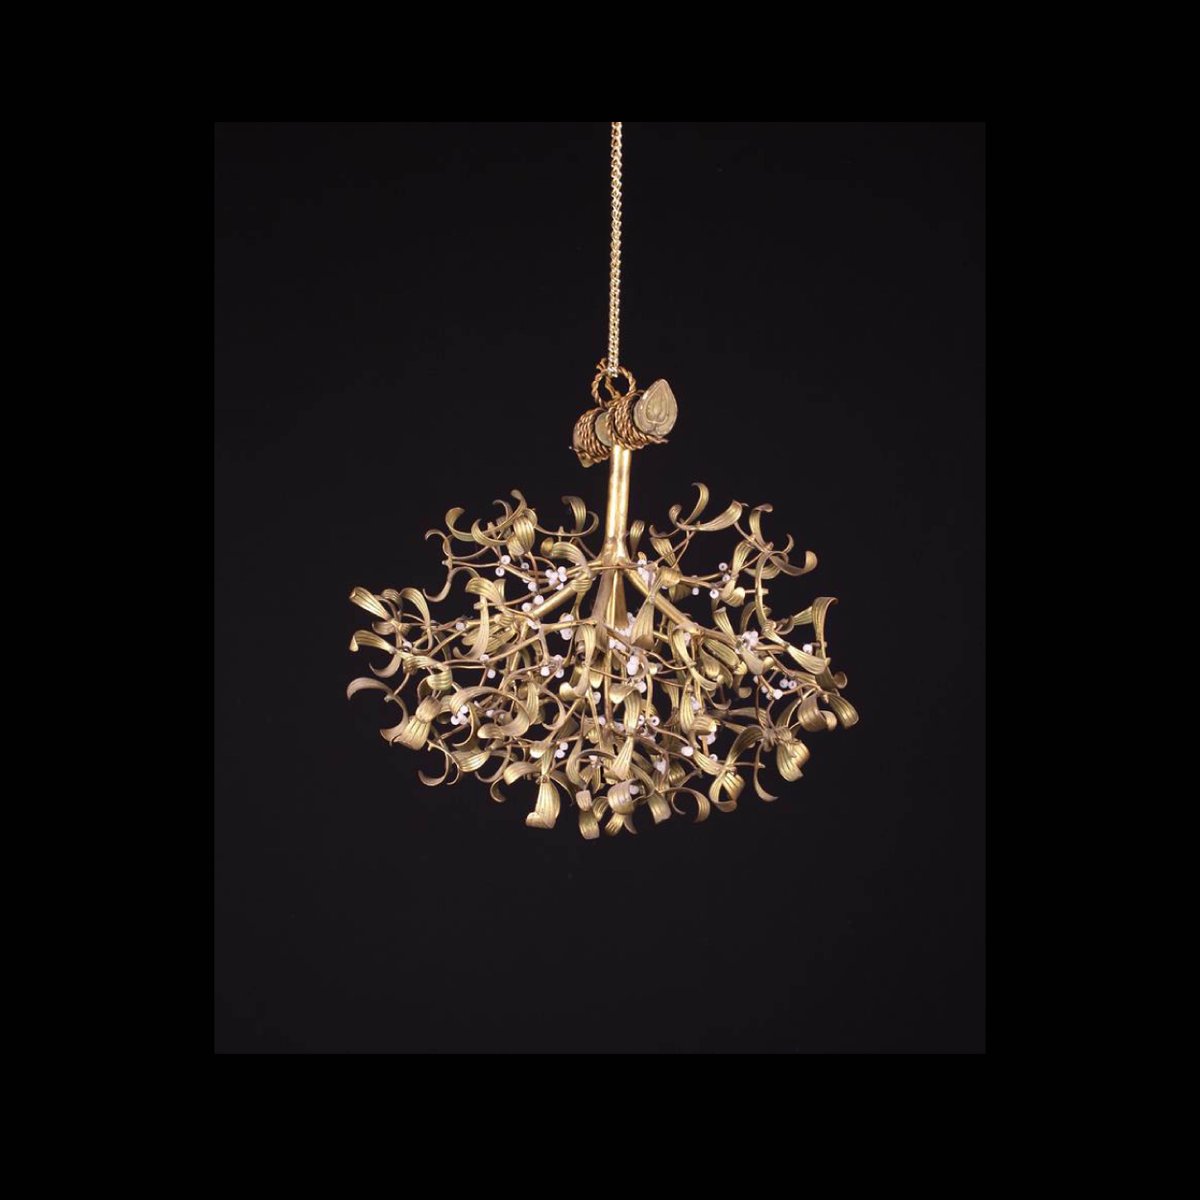 We're you the lucky one to get this? A Fabulous Austrian/Vienna Circa 1900 Brass and Bronze, Gold Patinated, Mistletoe Chandelier. Hammer £2,900. #auction #onlineauction #auctionhouse #auctioneer #vintage #auctioneers #bid #antiques #antique #auctionswork #collection #sale #finef